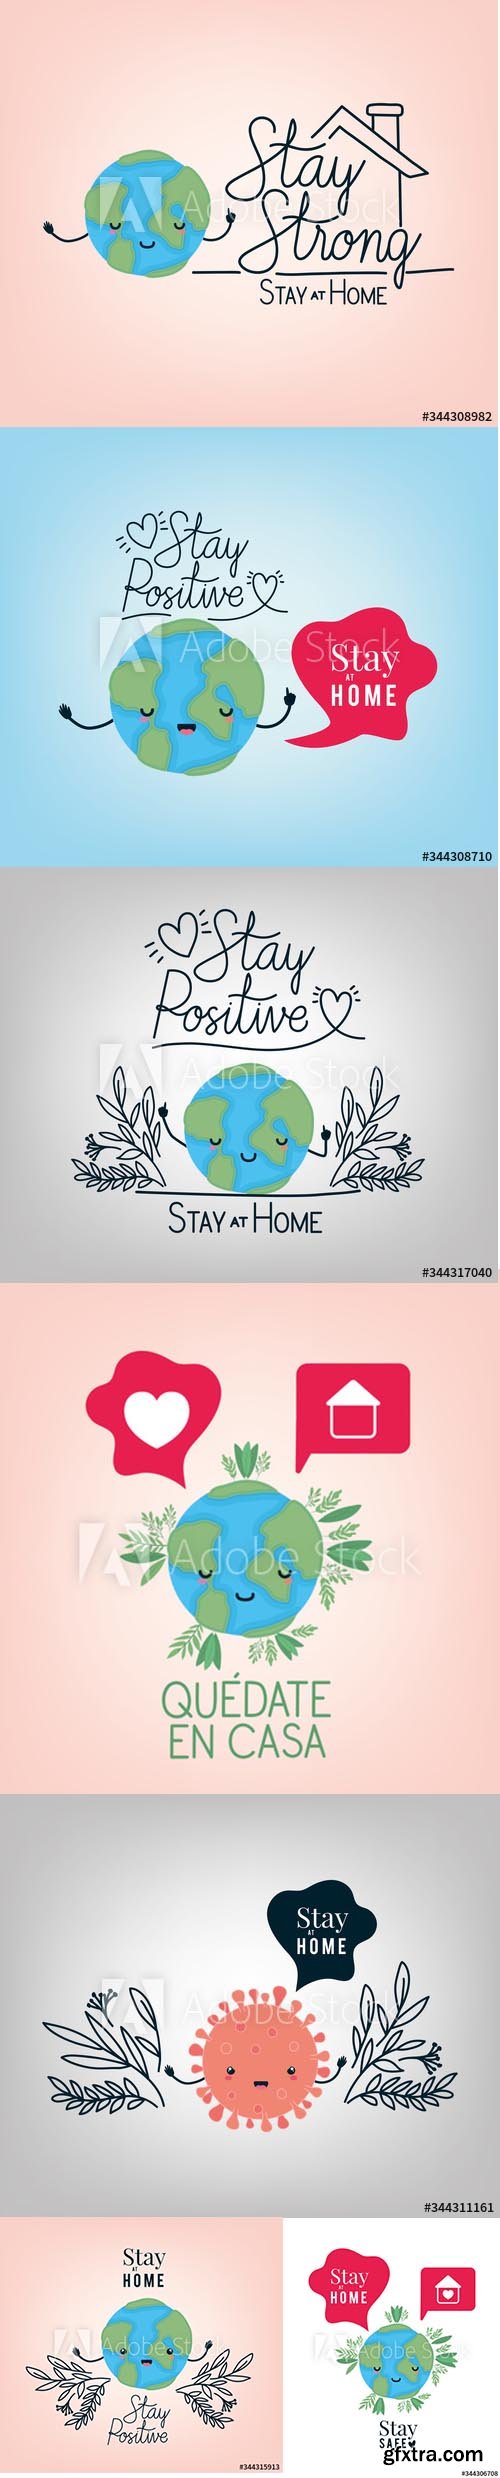 Stay at Home Positive Illustrations Set